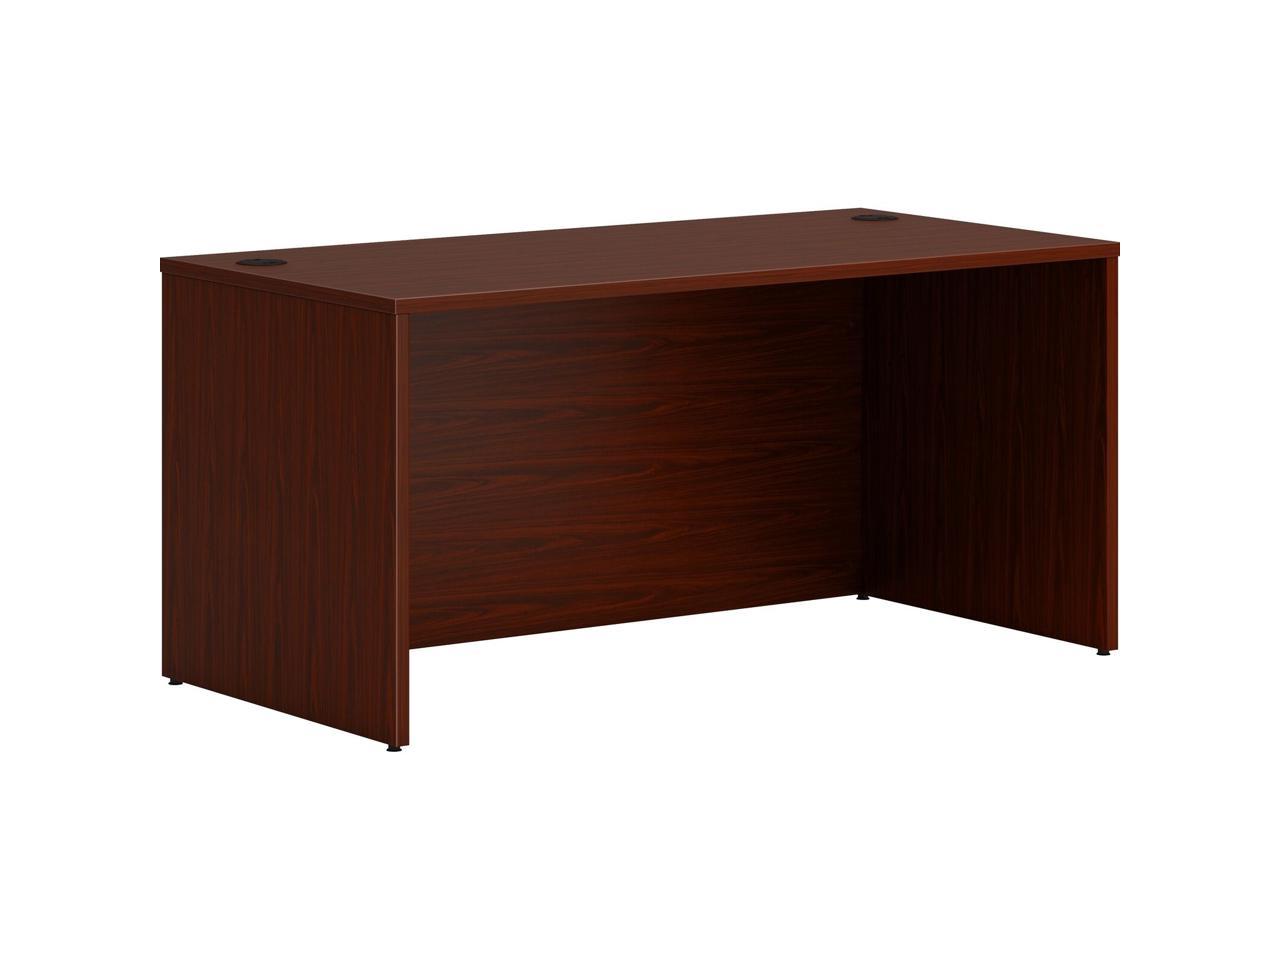 The HON LDS6030LS1 Desk Shell Rectangle 60/"w for sale online